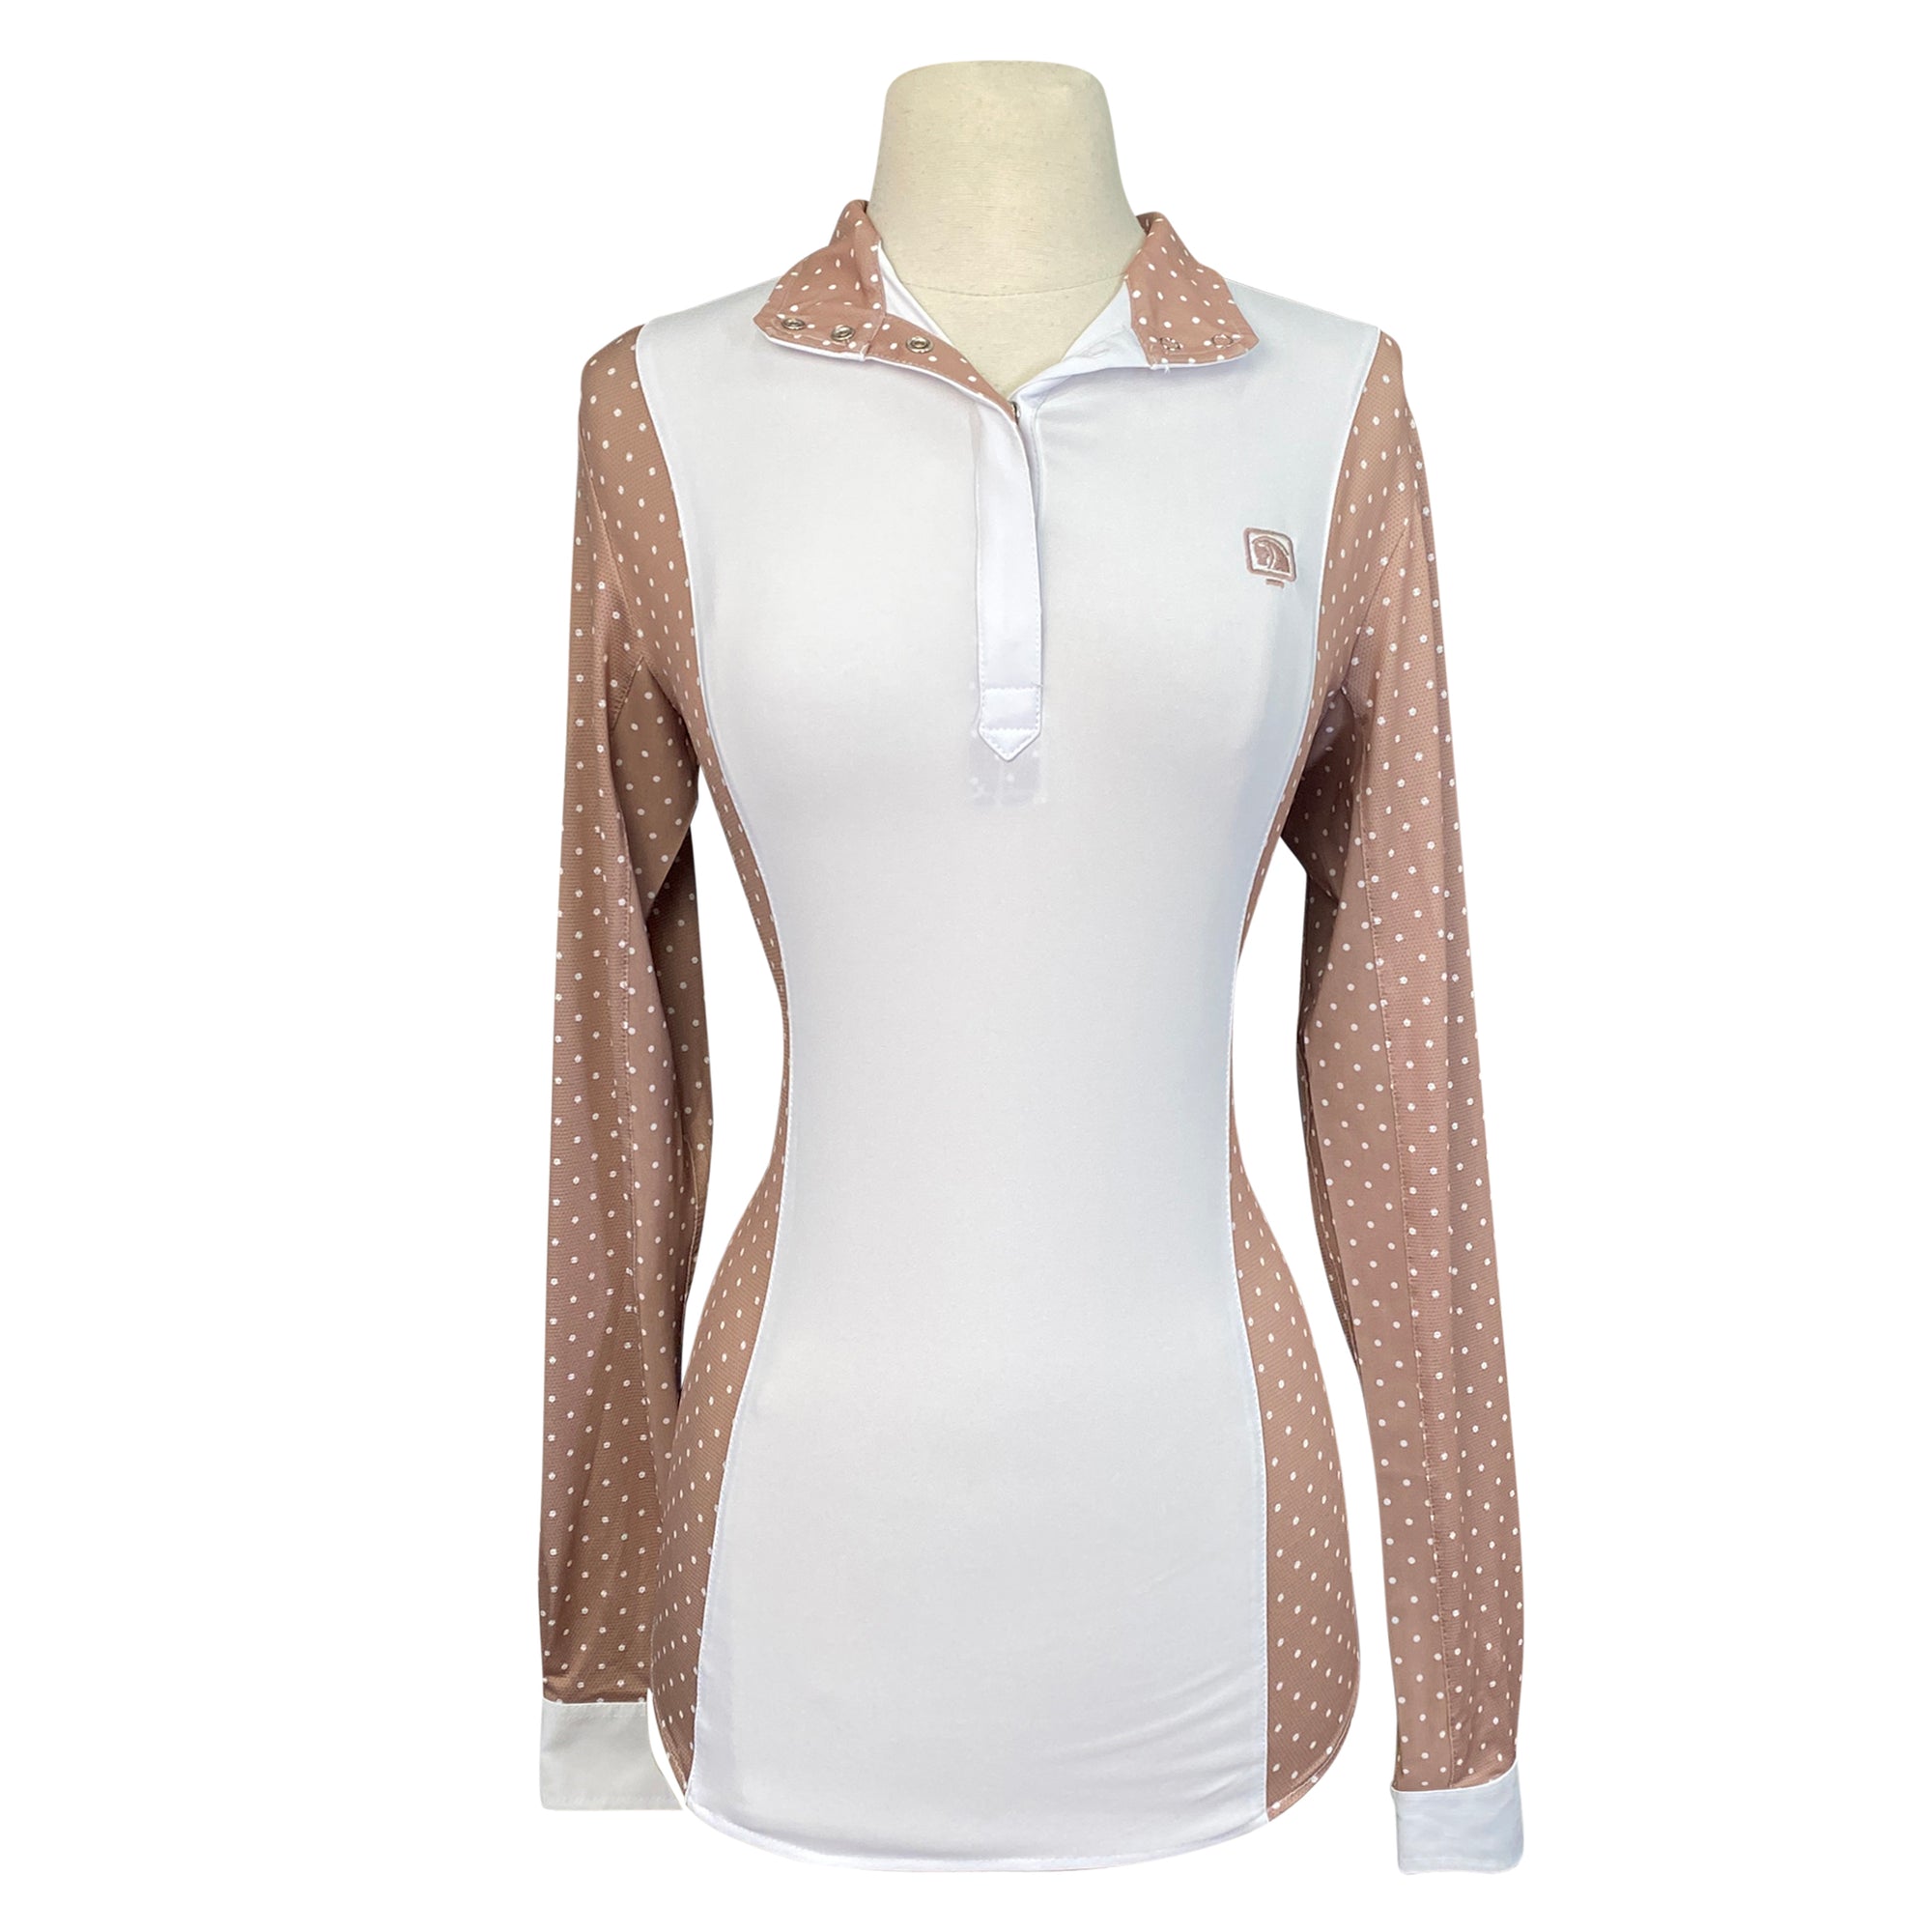 Romfh 'Schuyler' Show Shirt in White/Champagne Dots